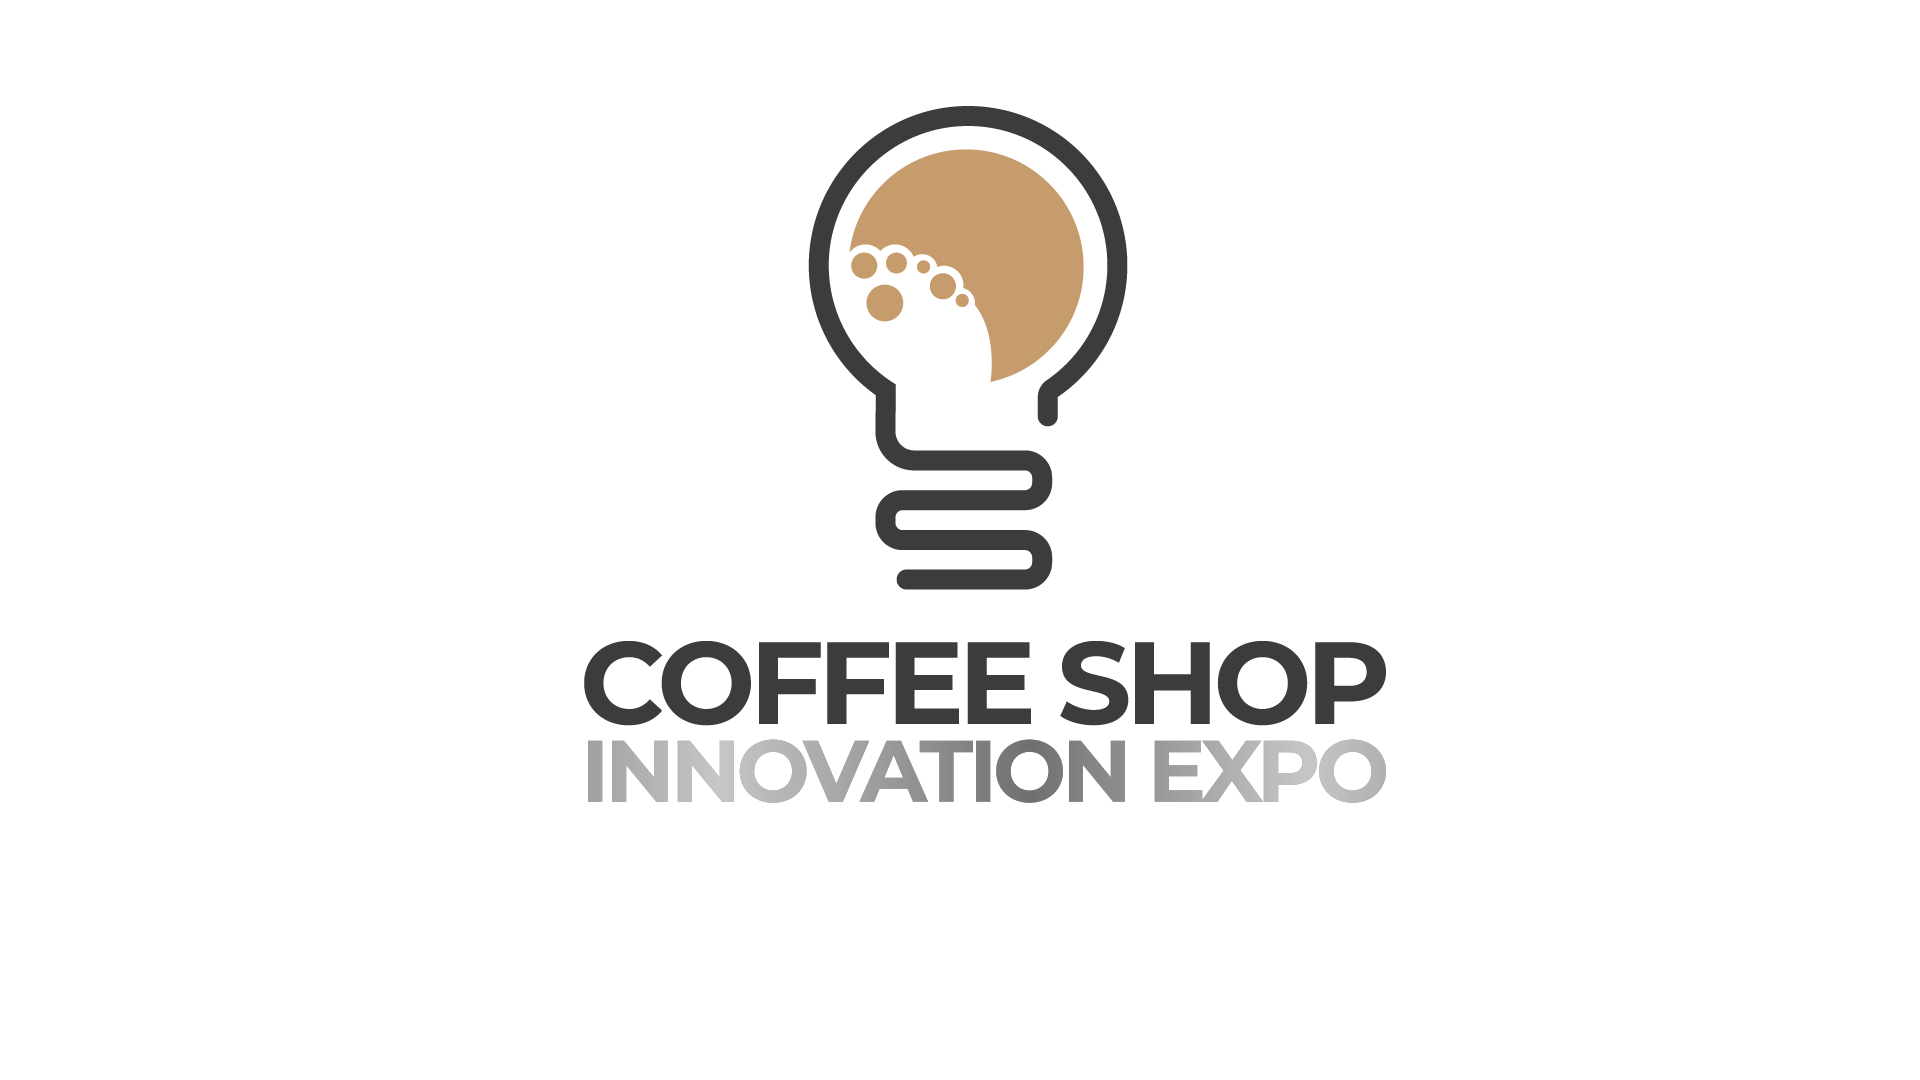 The Coffee Shop Innovation Expo